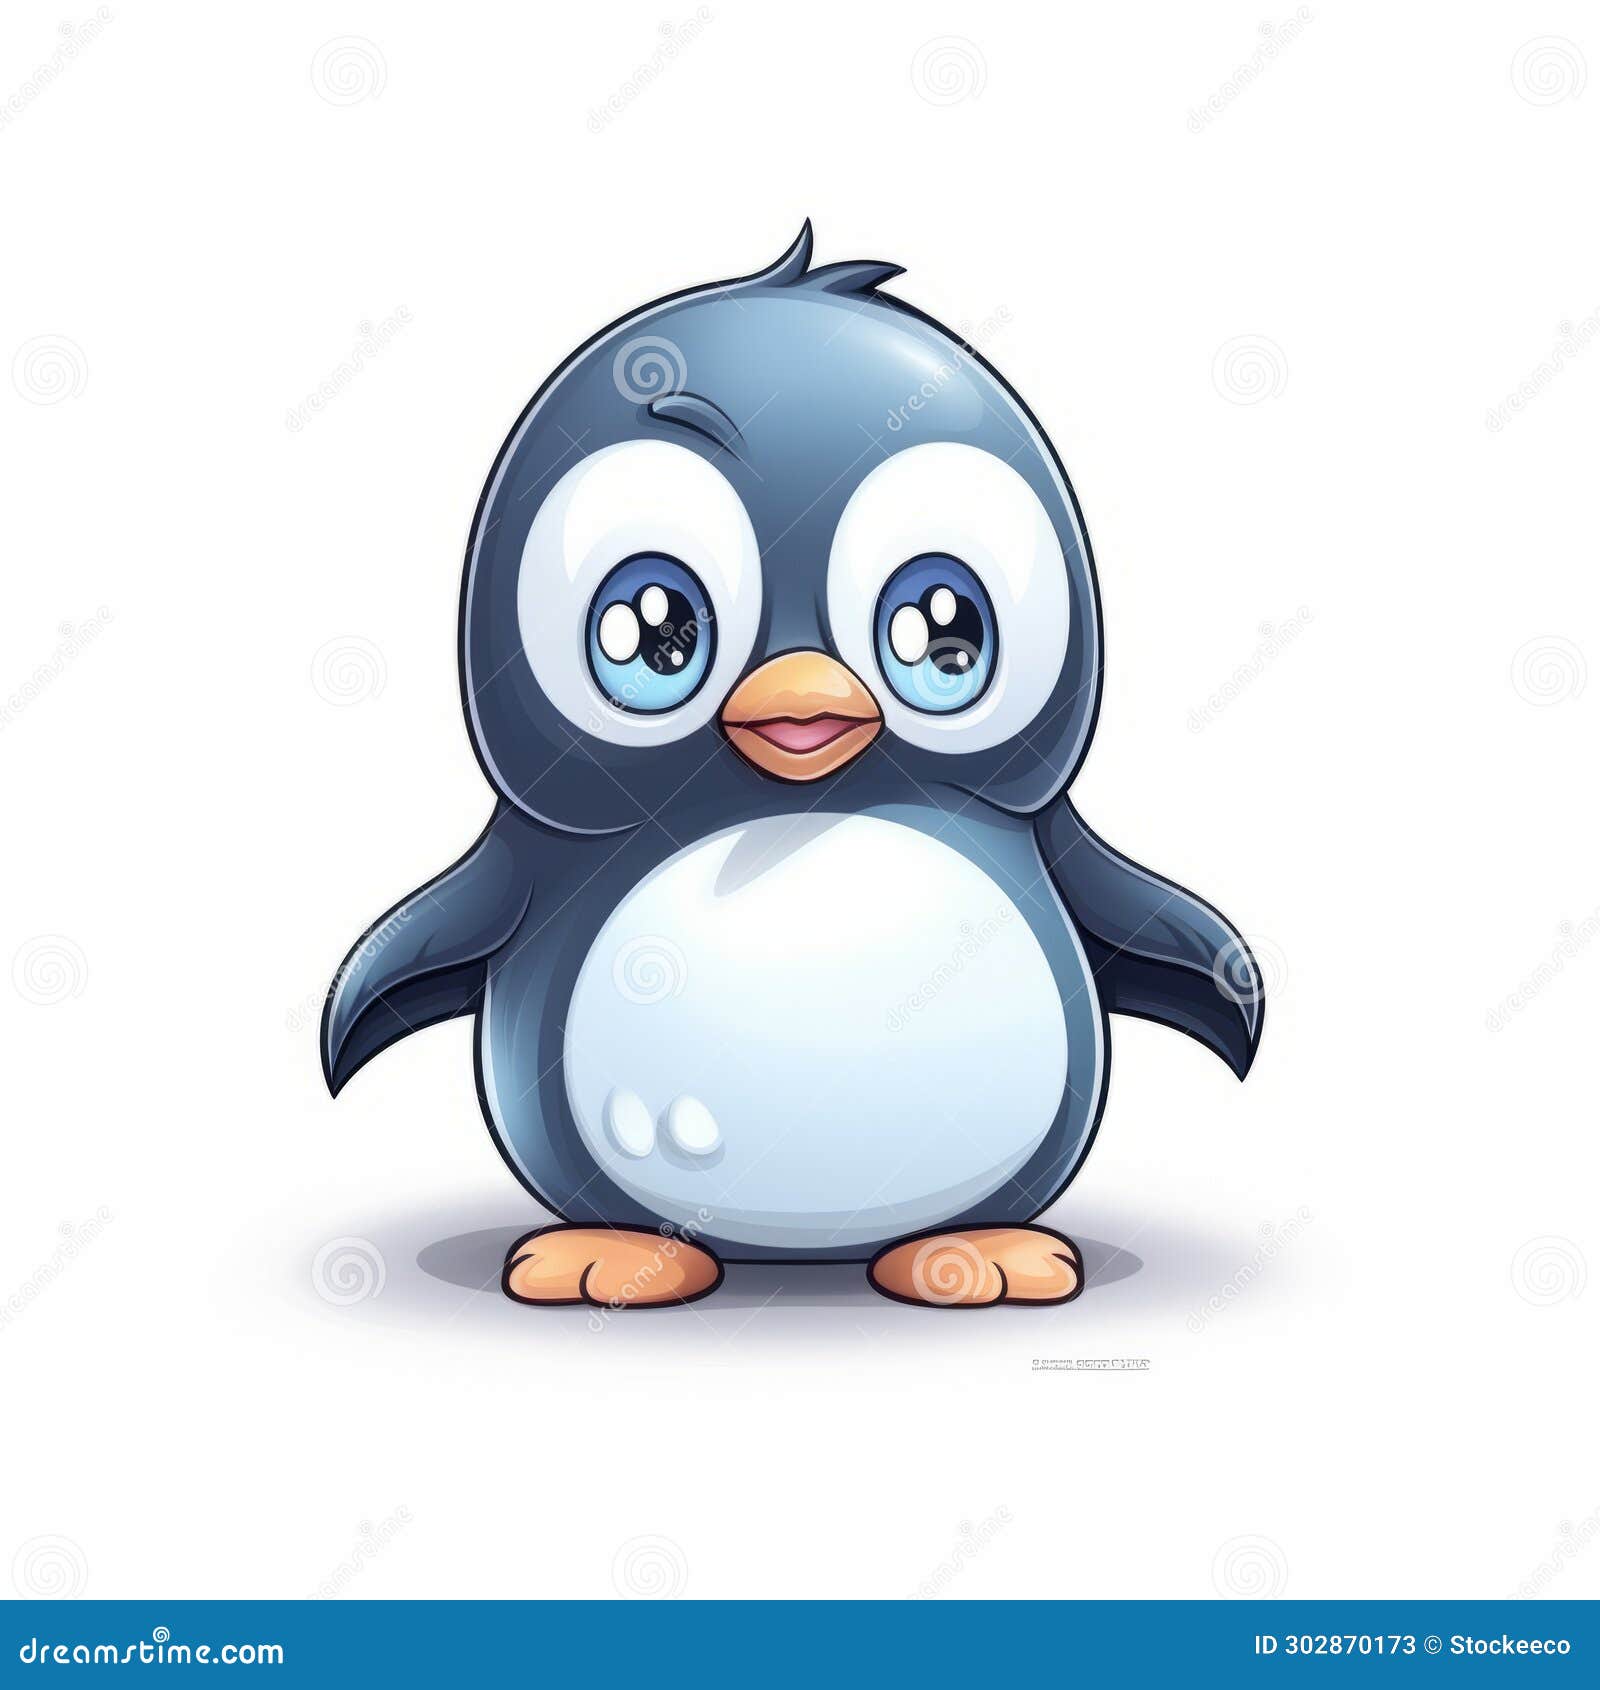 Hand Drawn Animals PNG Picture, Cartoon Anime Hand Drawn Animal Penguin,  Cartoon Animals, Lovely Animals, Hand Painted PNG Image For Free Download